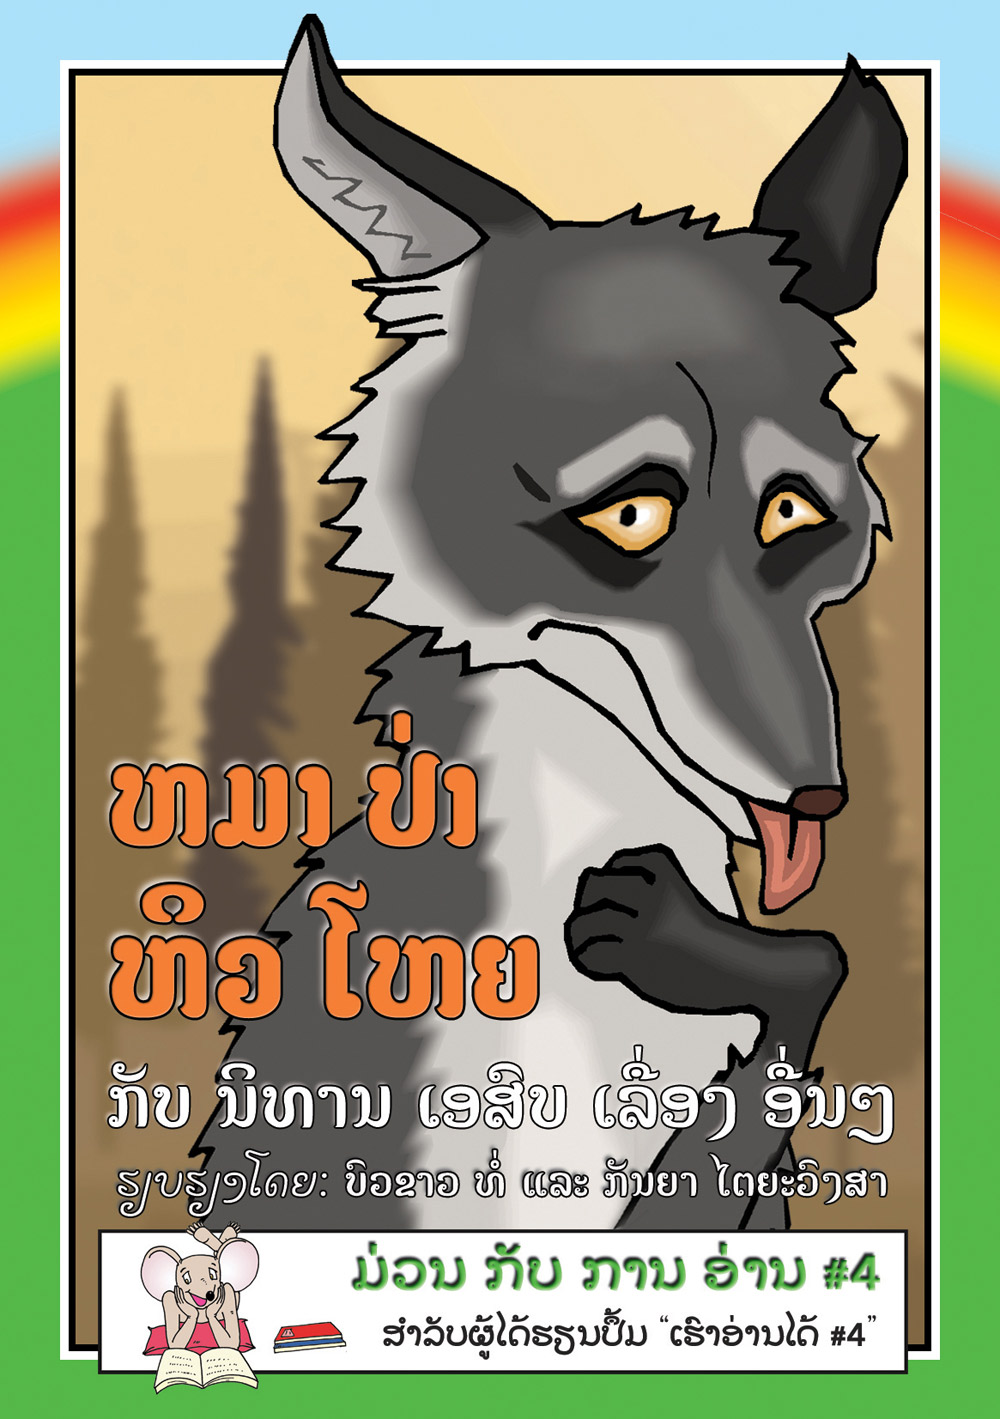 The Very Hungry Wolf large book cover, published in Lao language